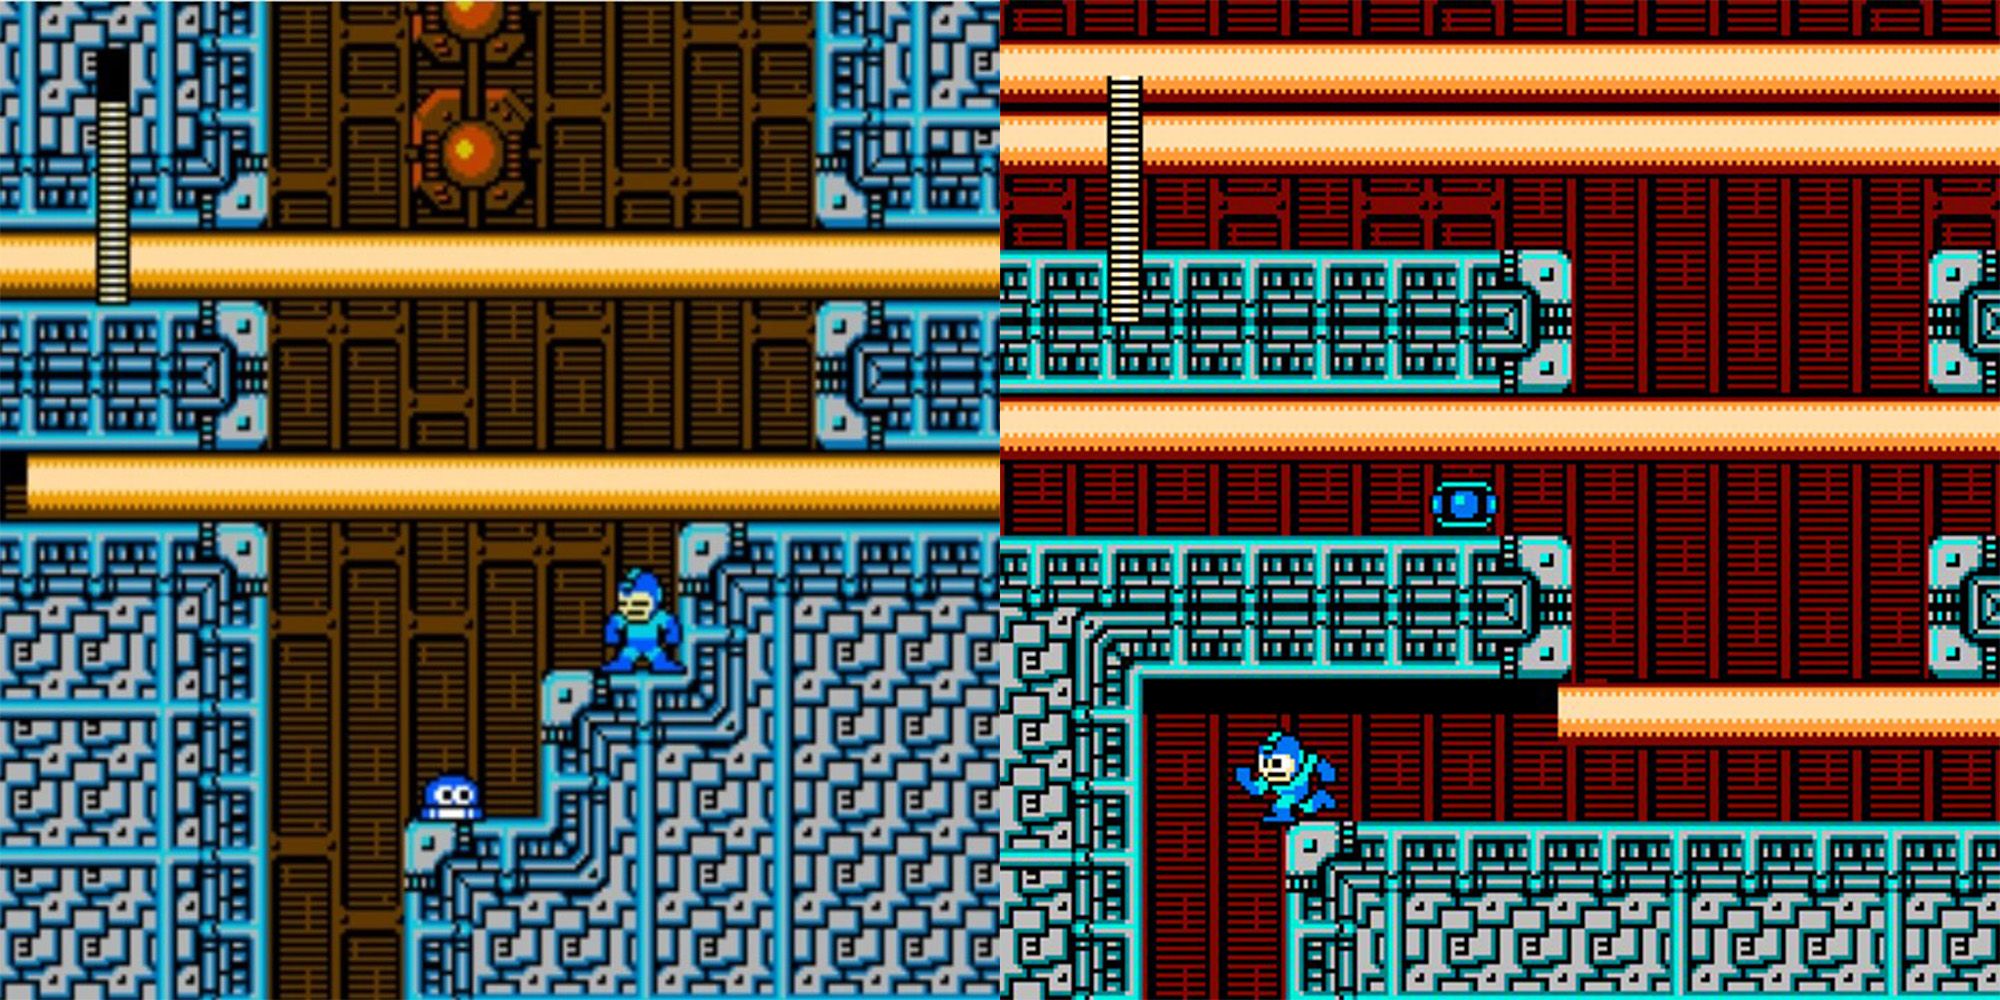 Quick Man's Stage from Mega Man 2